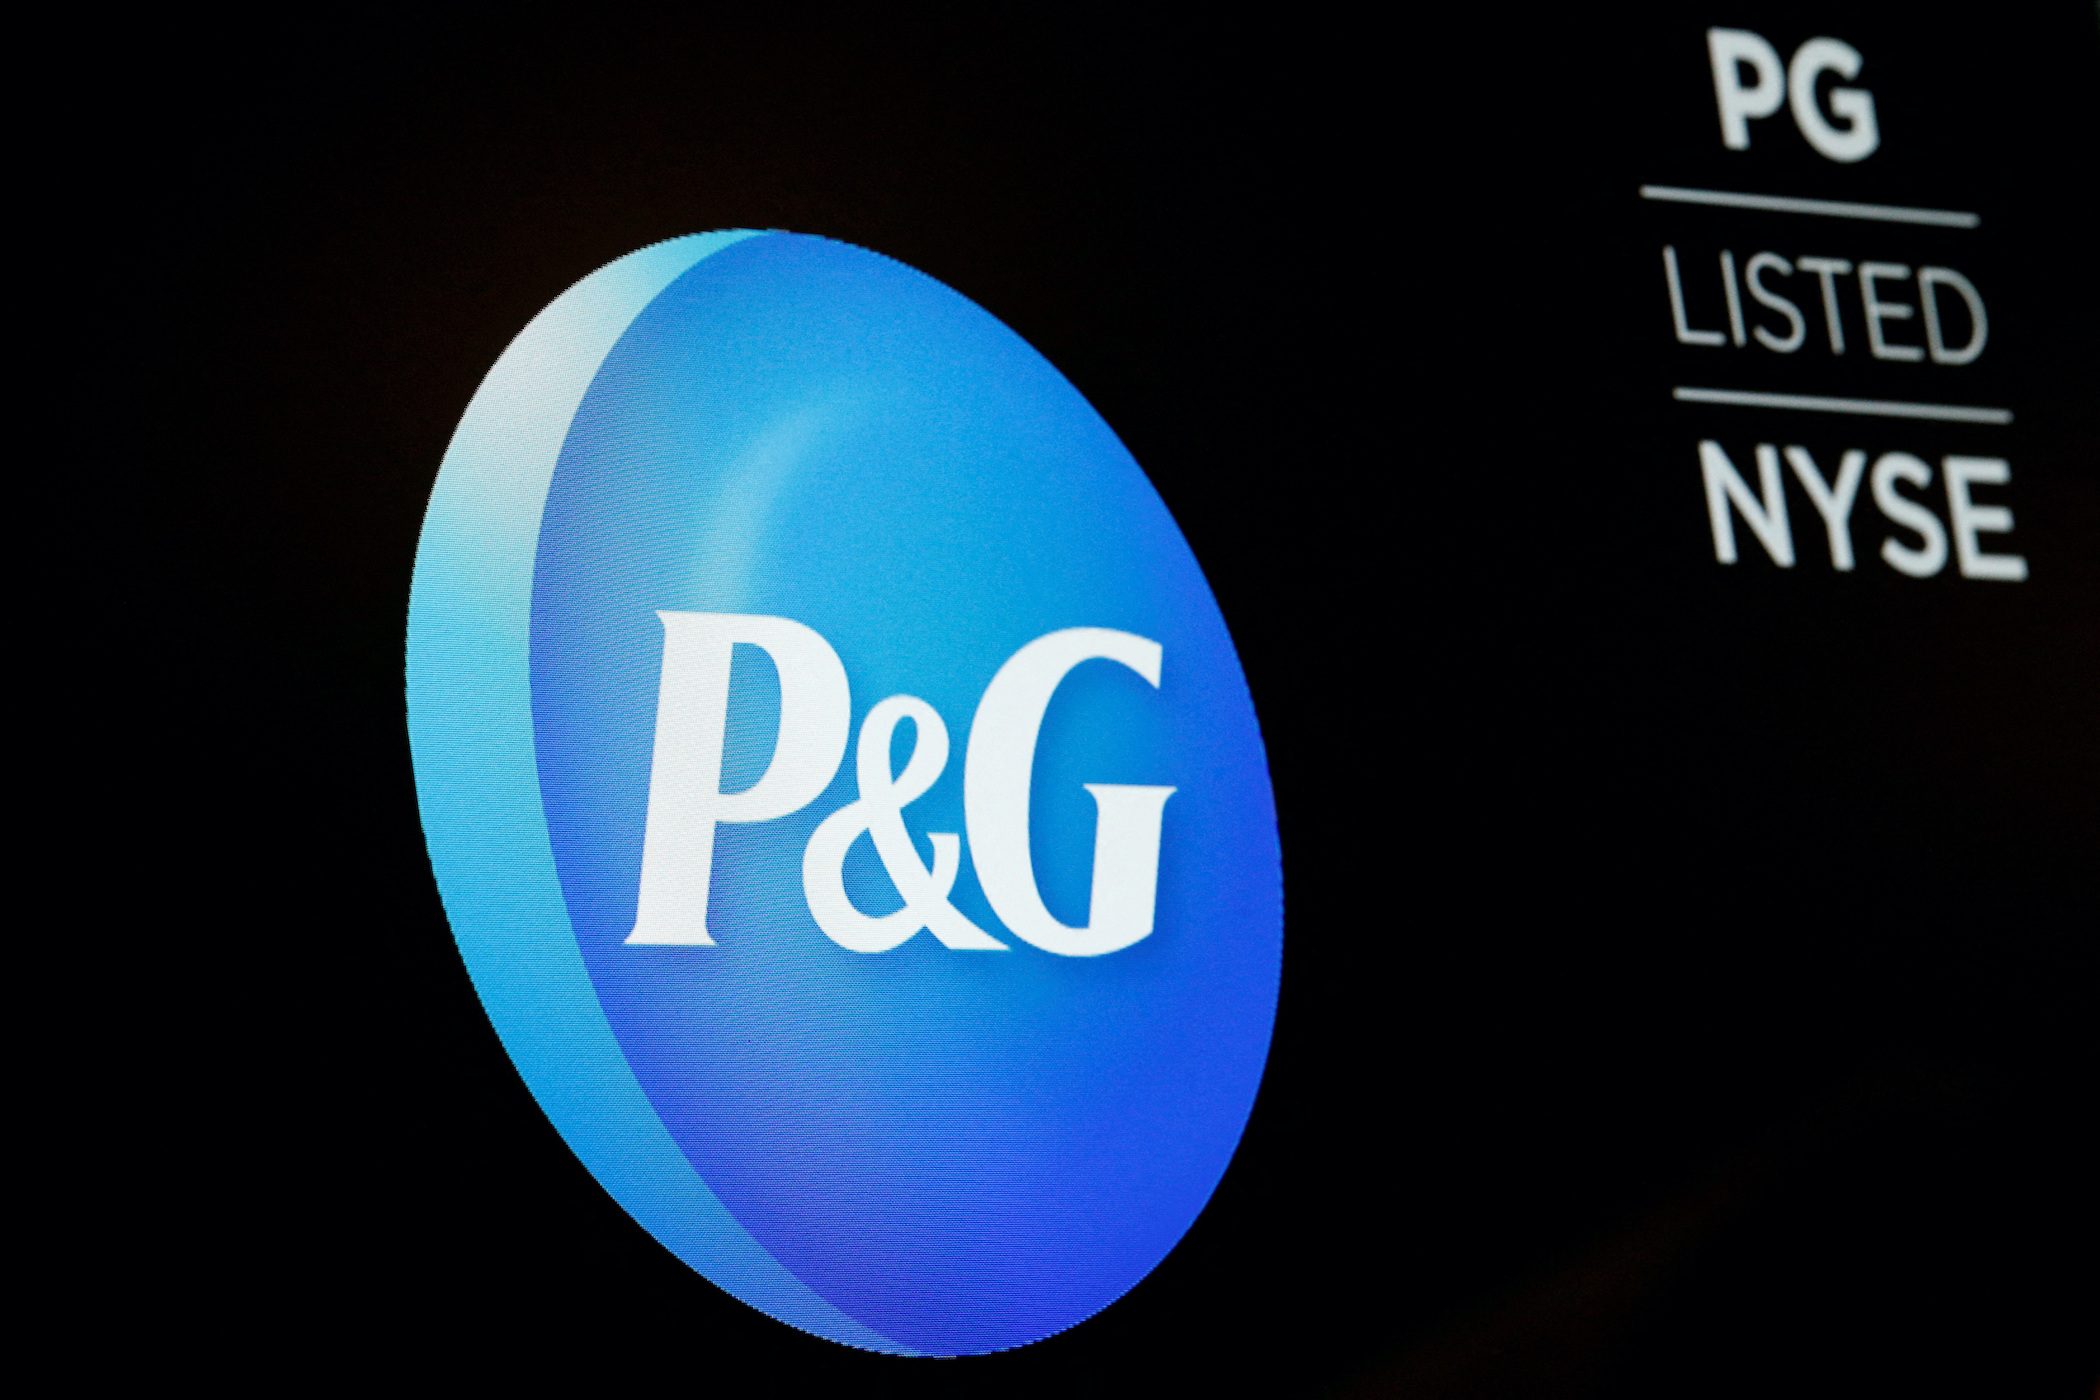 Procter & Gamble sales, earnings get boost from price hikes